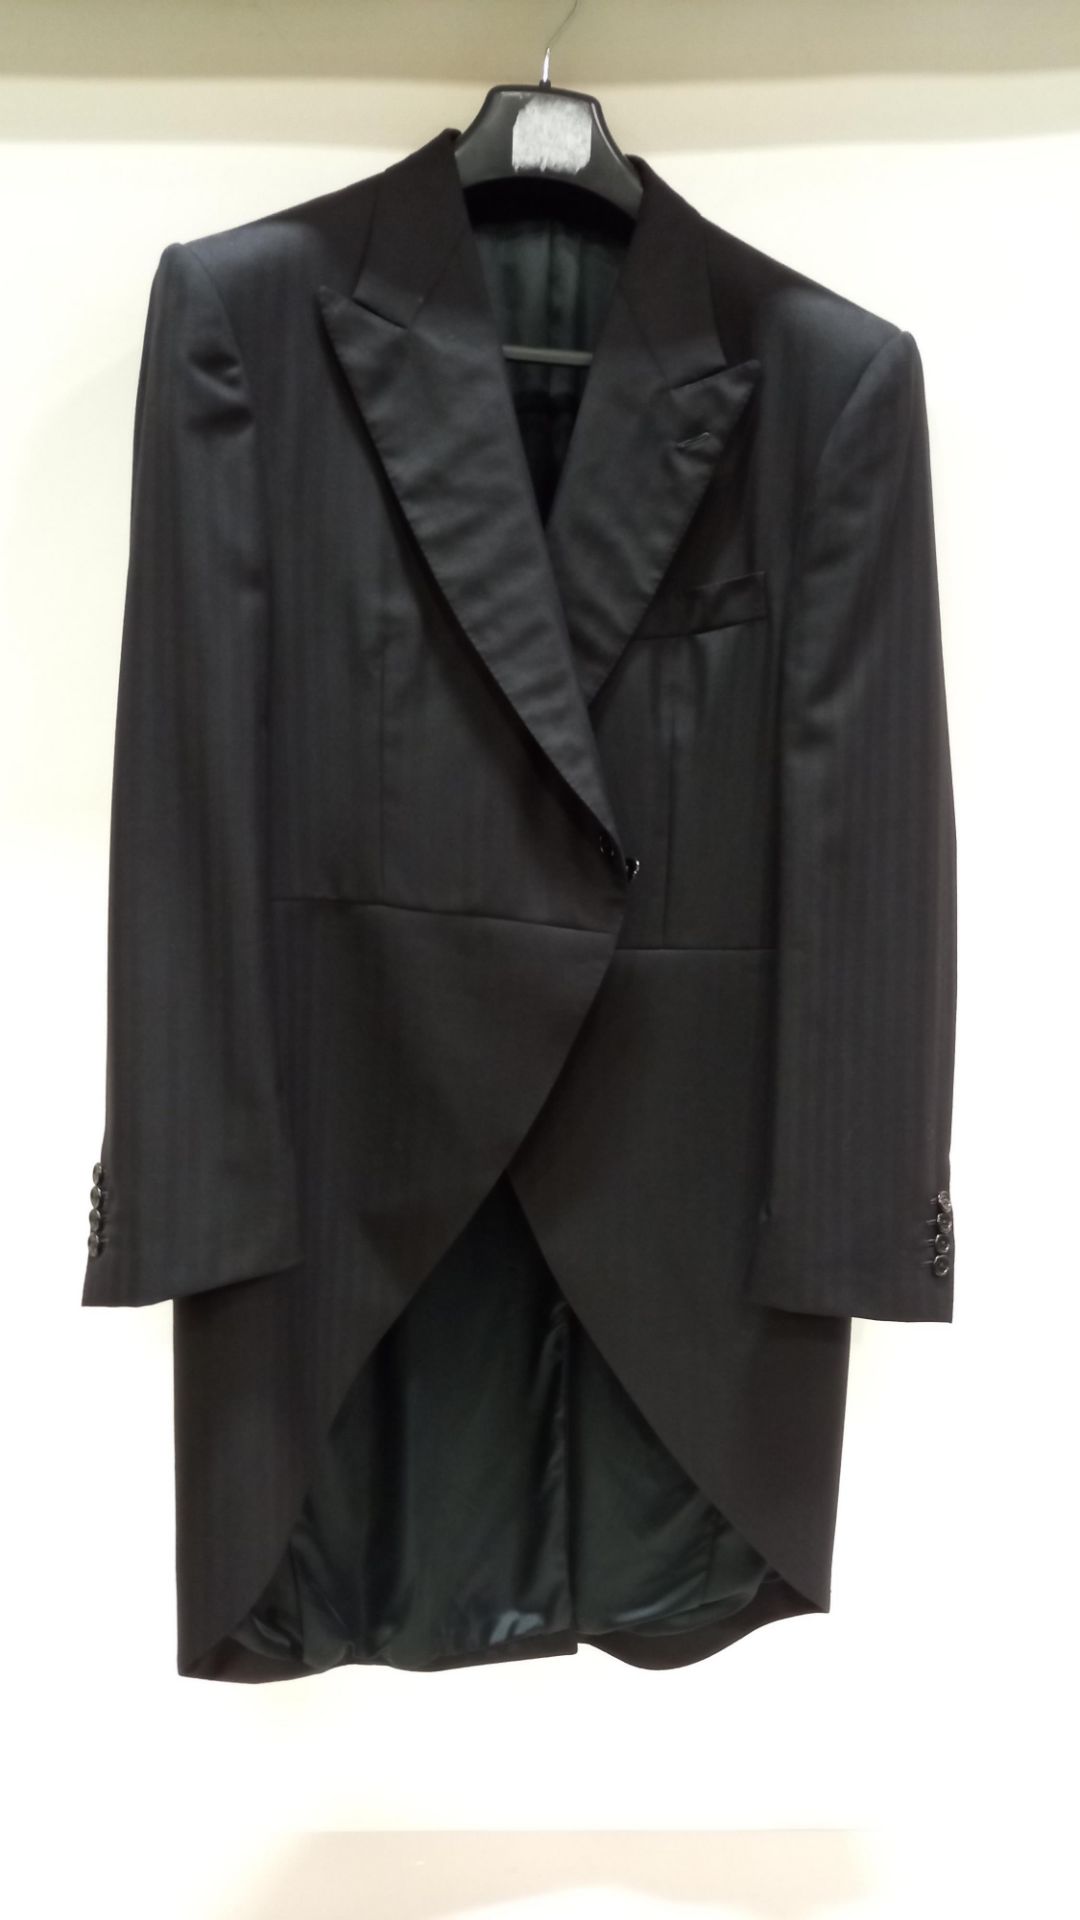 3 X BRAND NEW LUTWYCHE TAILORED BLACK TAILCOATS SIZE 46L,46R,40S (PLEASE NOTE NOT FULLY TAILORED)